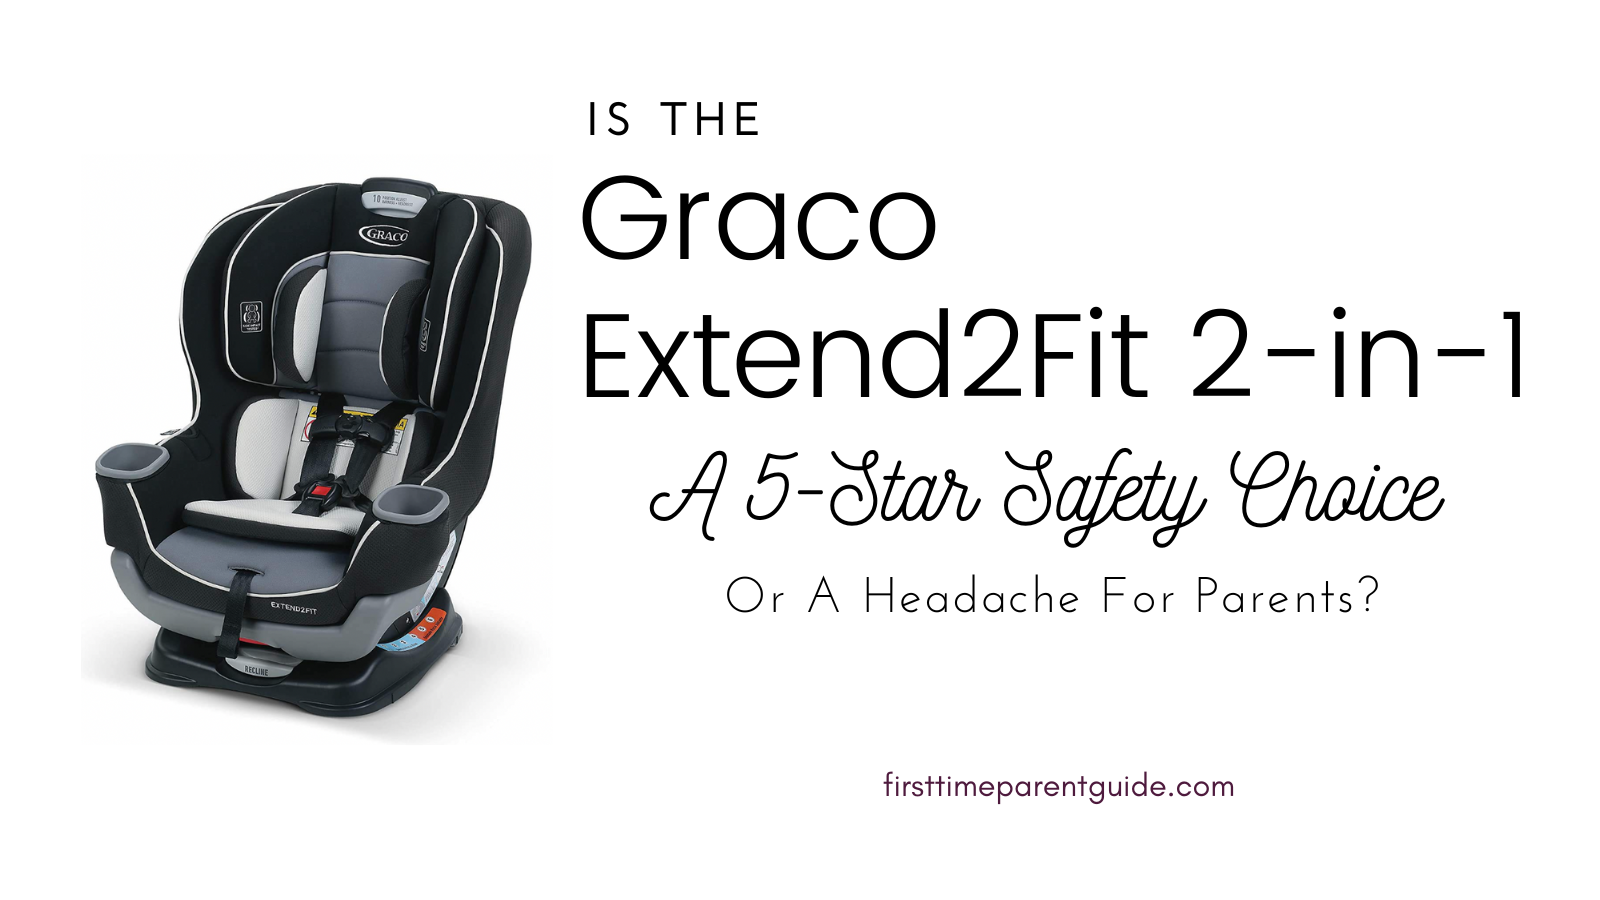 Graco Extend2Fit 2 in 1